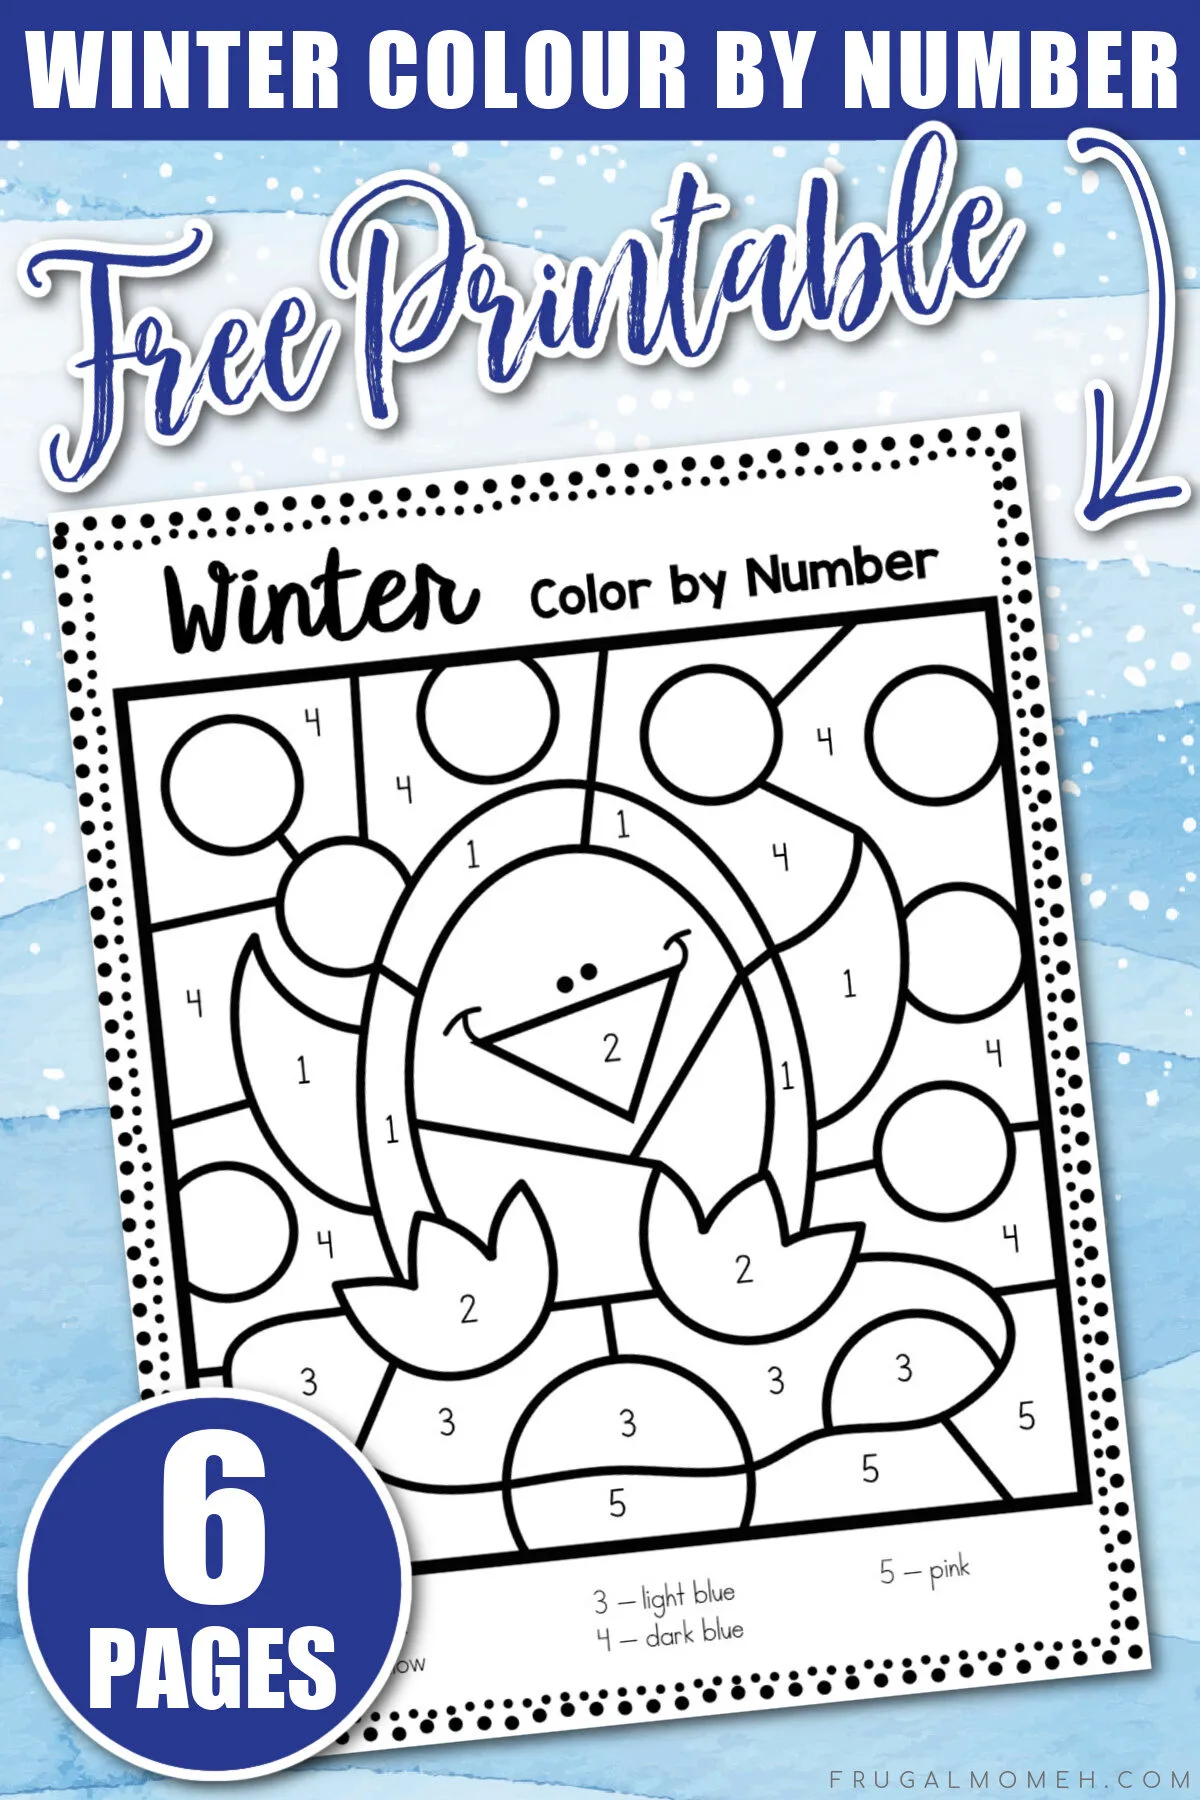 Looking for free printable winter colour by number worksheets? We've got your back! Here's 6 of them, perfect for kids of all ages.